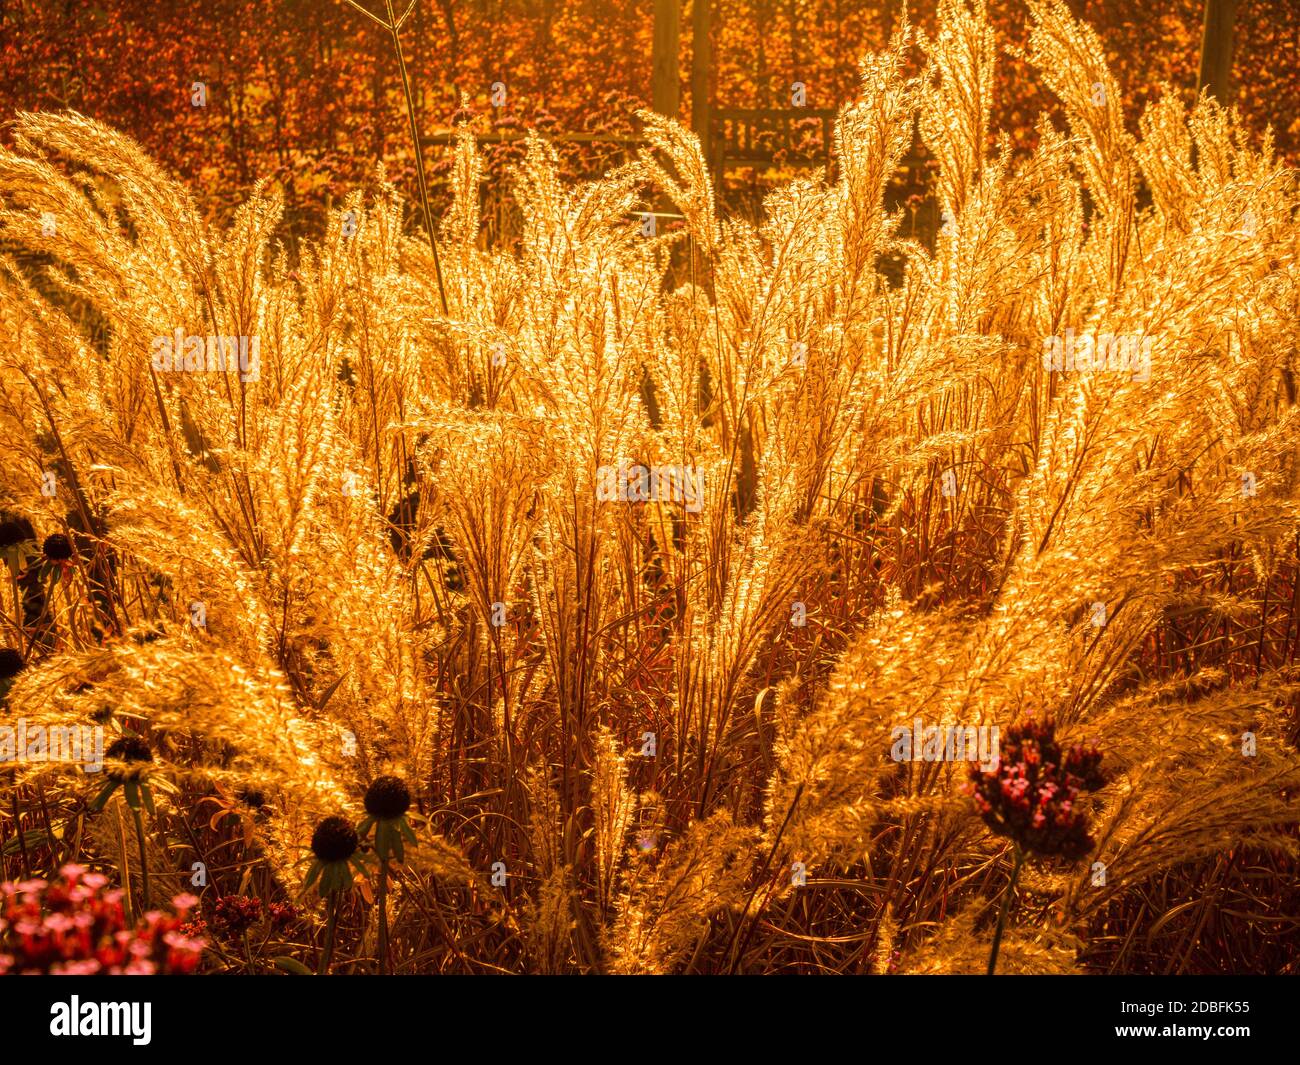 Backlit ornamental grasses with a golden Beech hedge in the background. Stock Photo